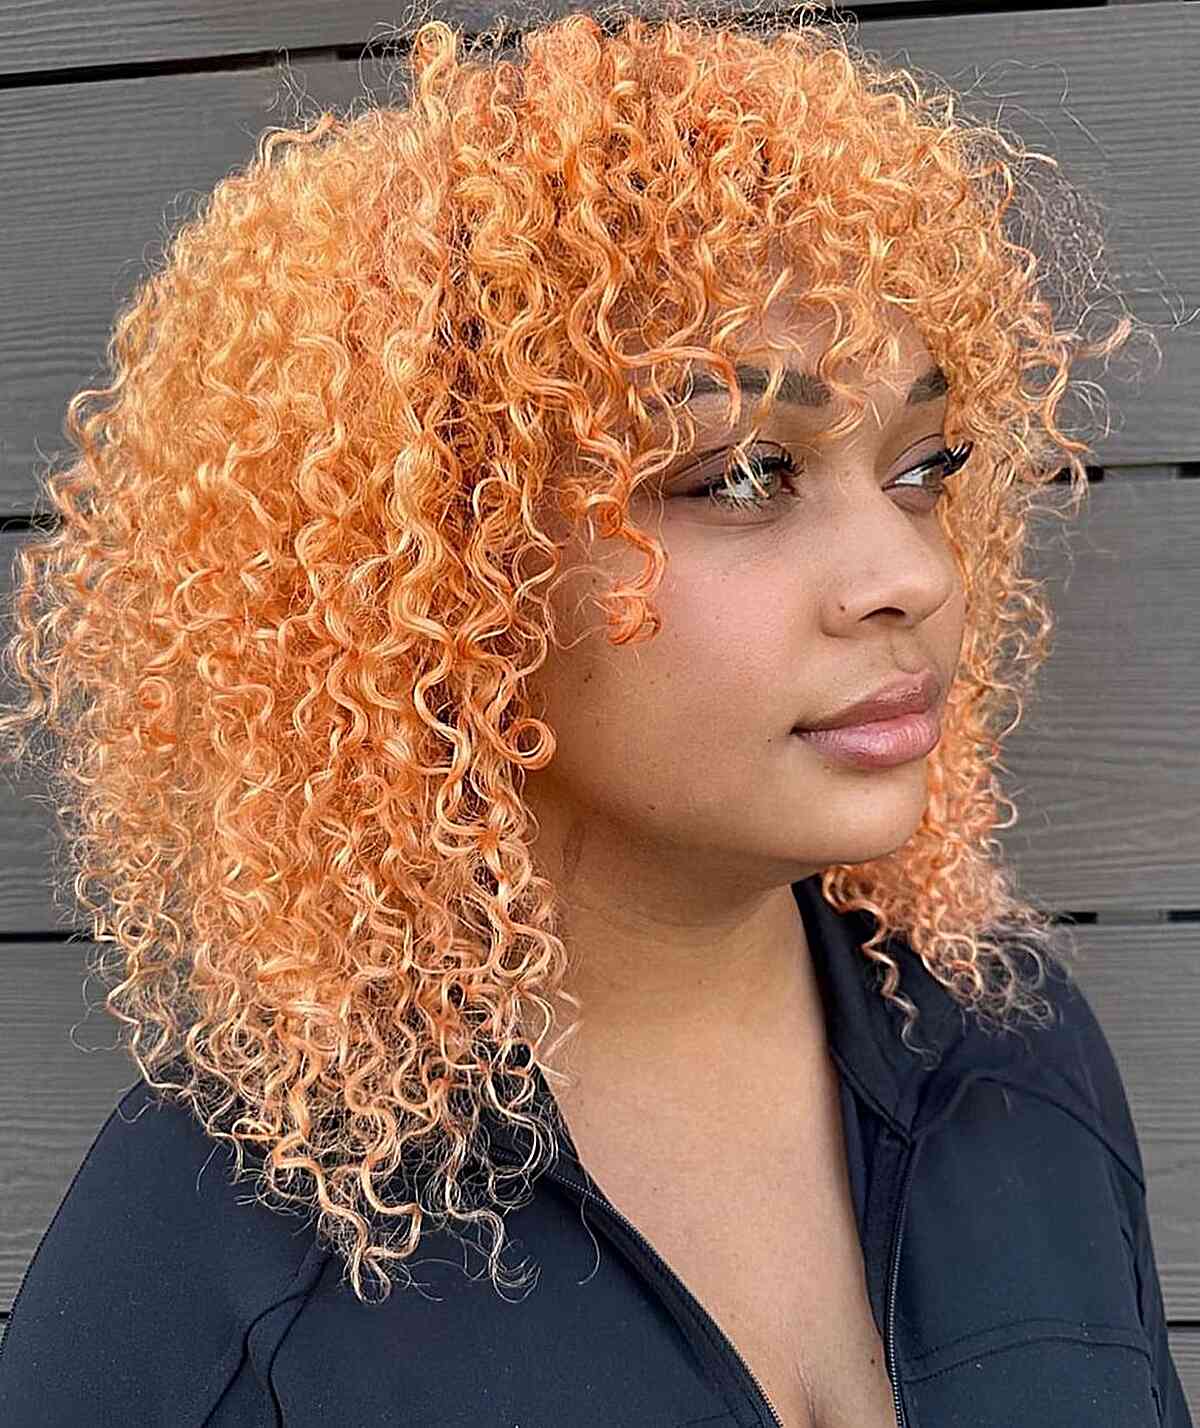 Shoulder-Length Light Peach Curly Hair with Bangs for Festivals